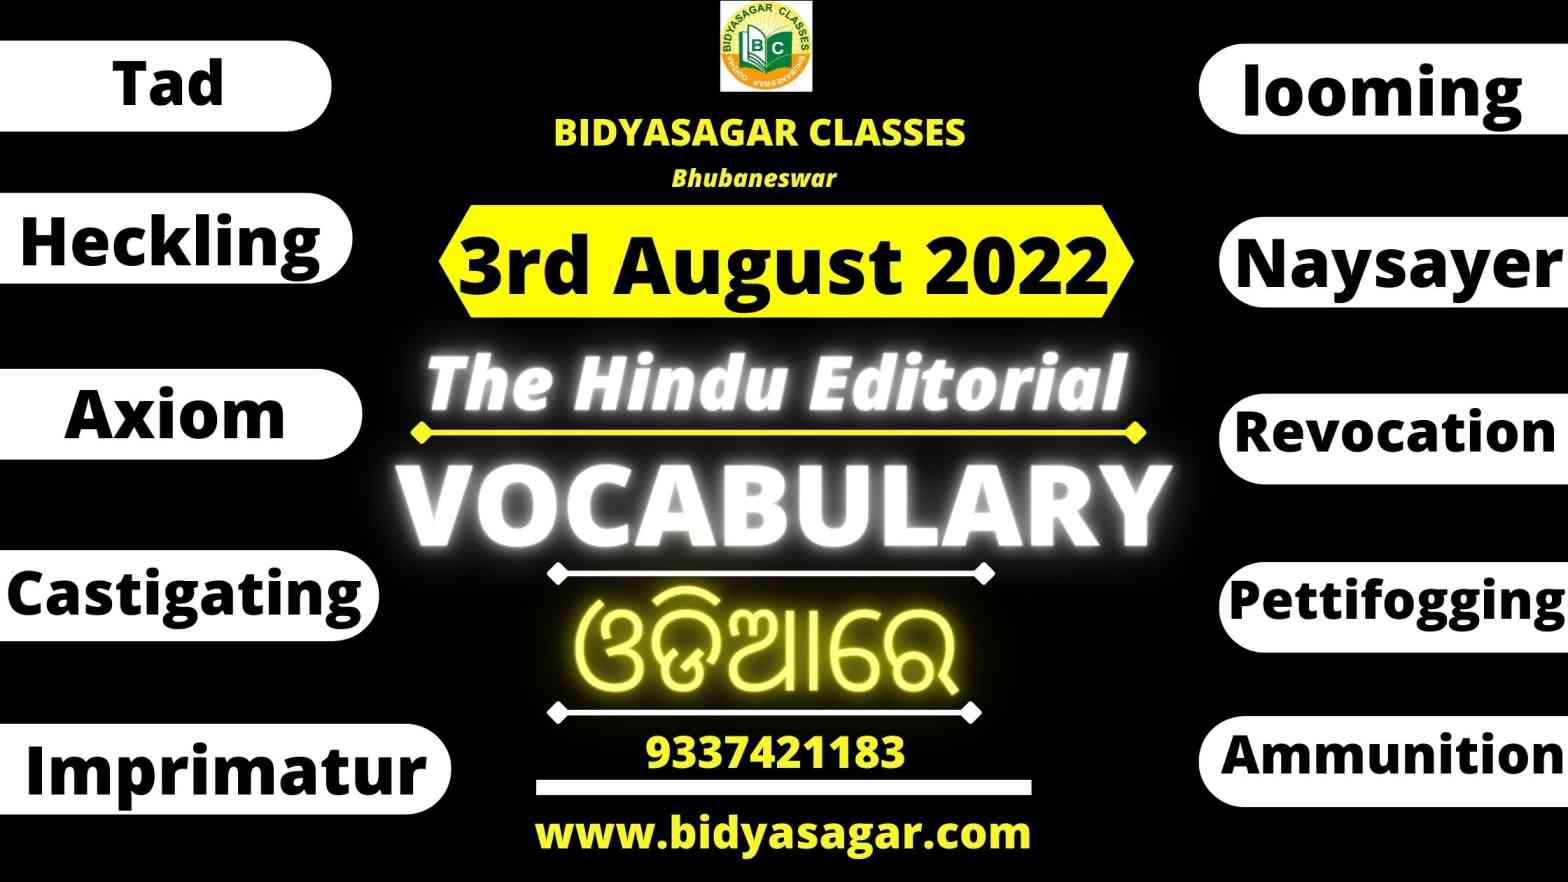 The Hindu Editorial Vocabulary of 3rd August 2022